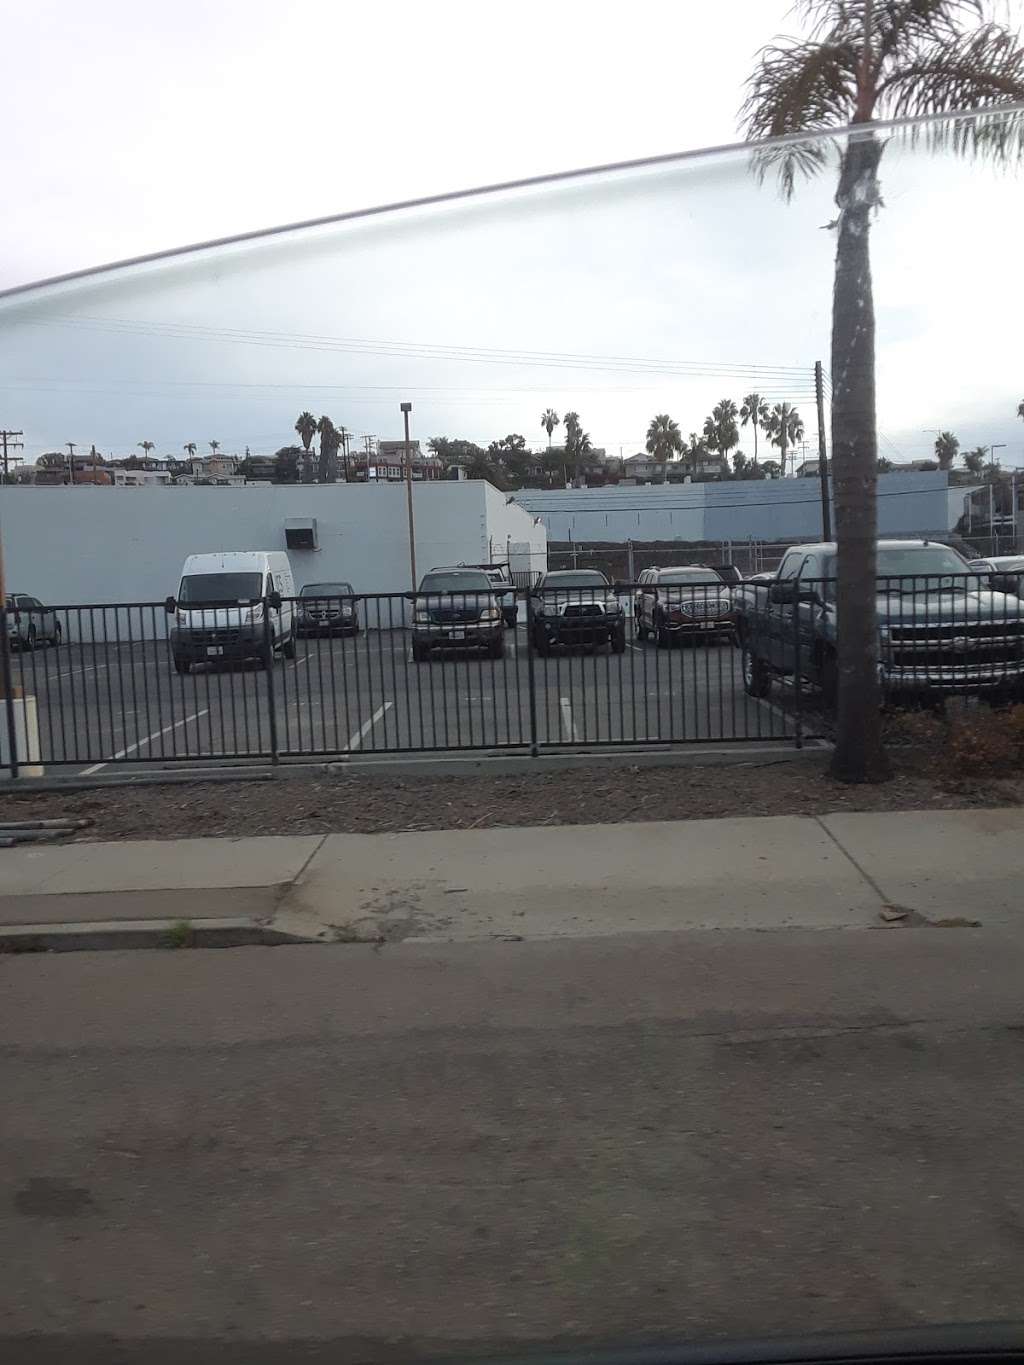 Park N Fly - Lot 5 | 3275 Pacific Hwy, San Diego, CA 92101, USA | Phone: (619) 209-7755